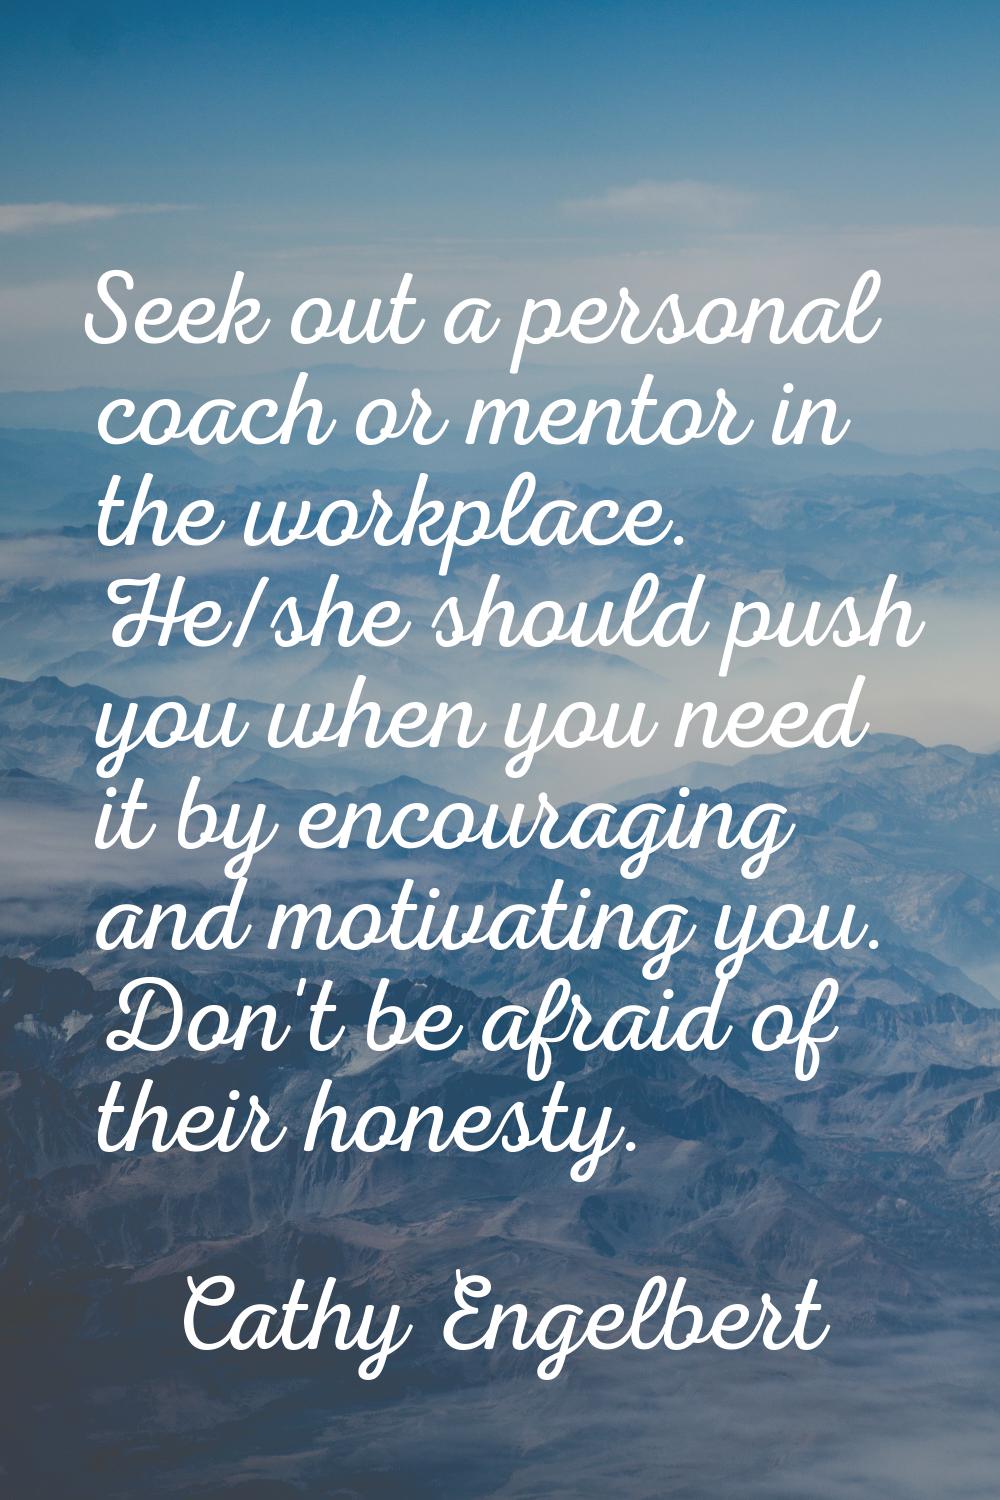 Seek out a personal coach or mentor in the workplace. He/she should push you when you need it by en